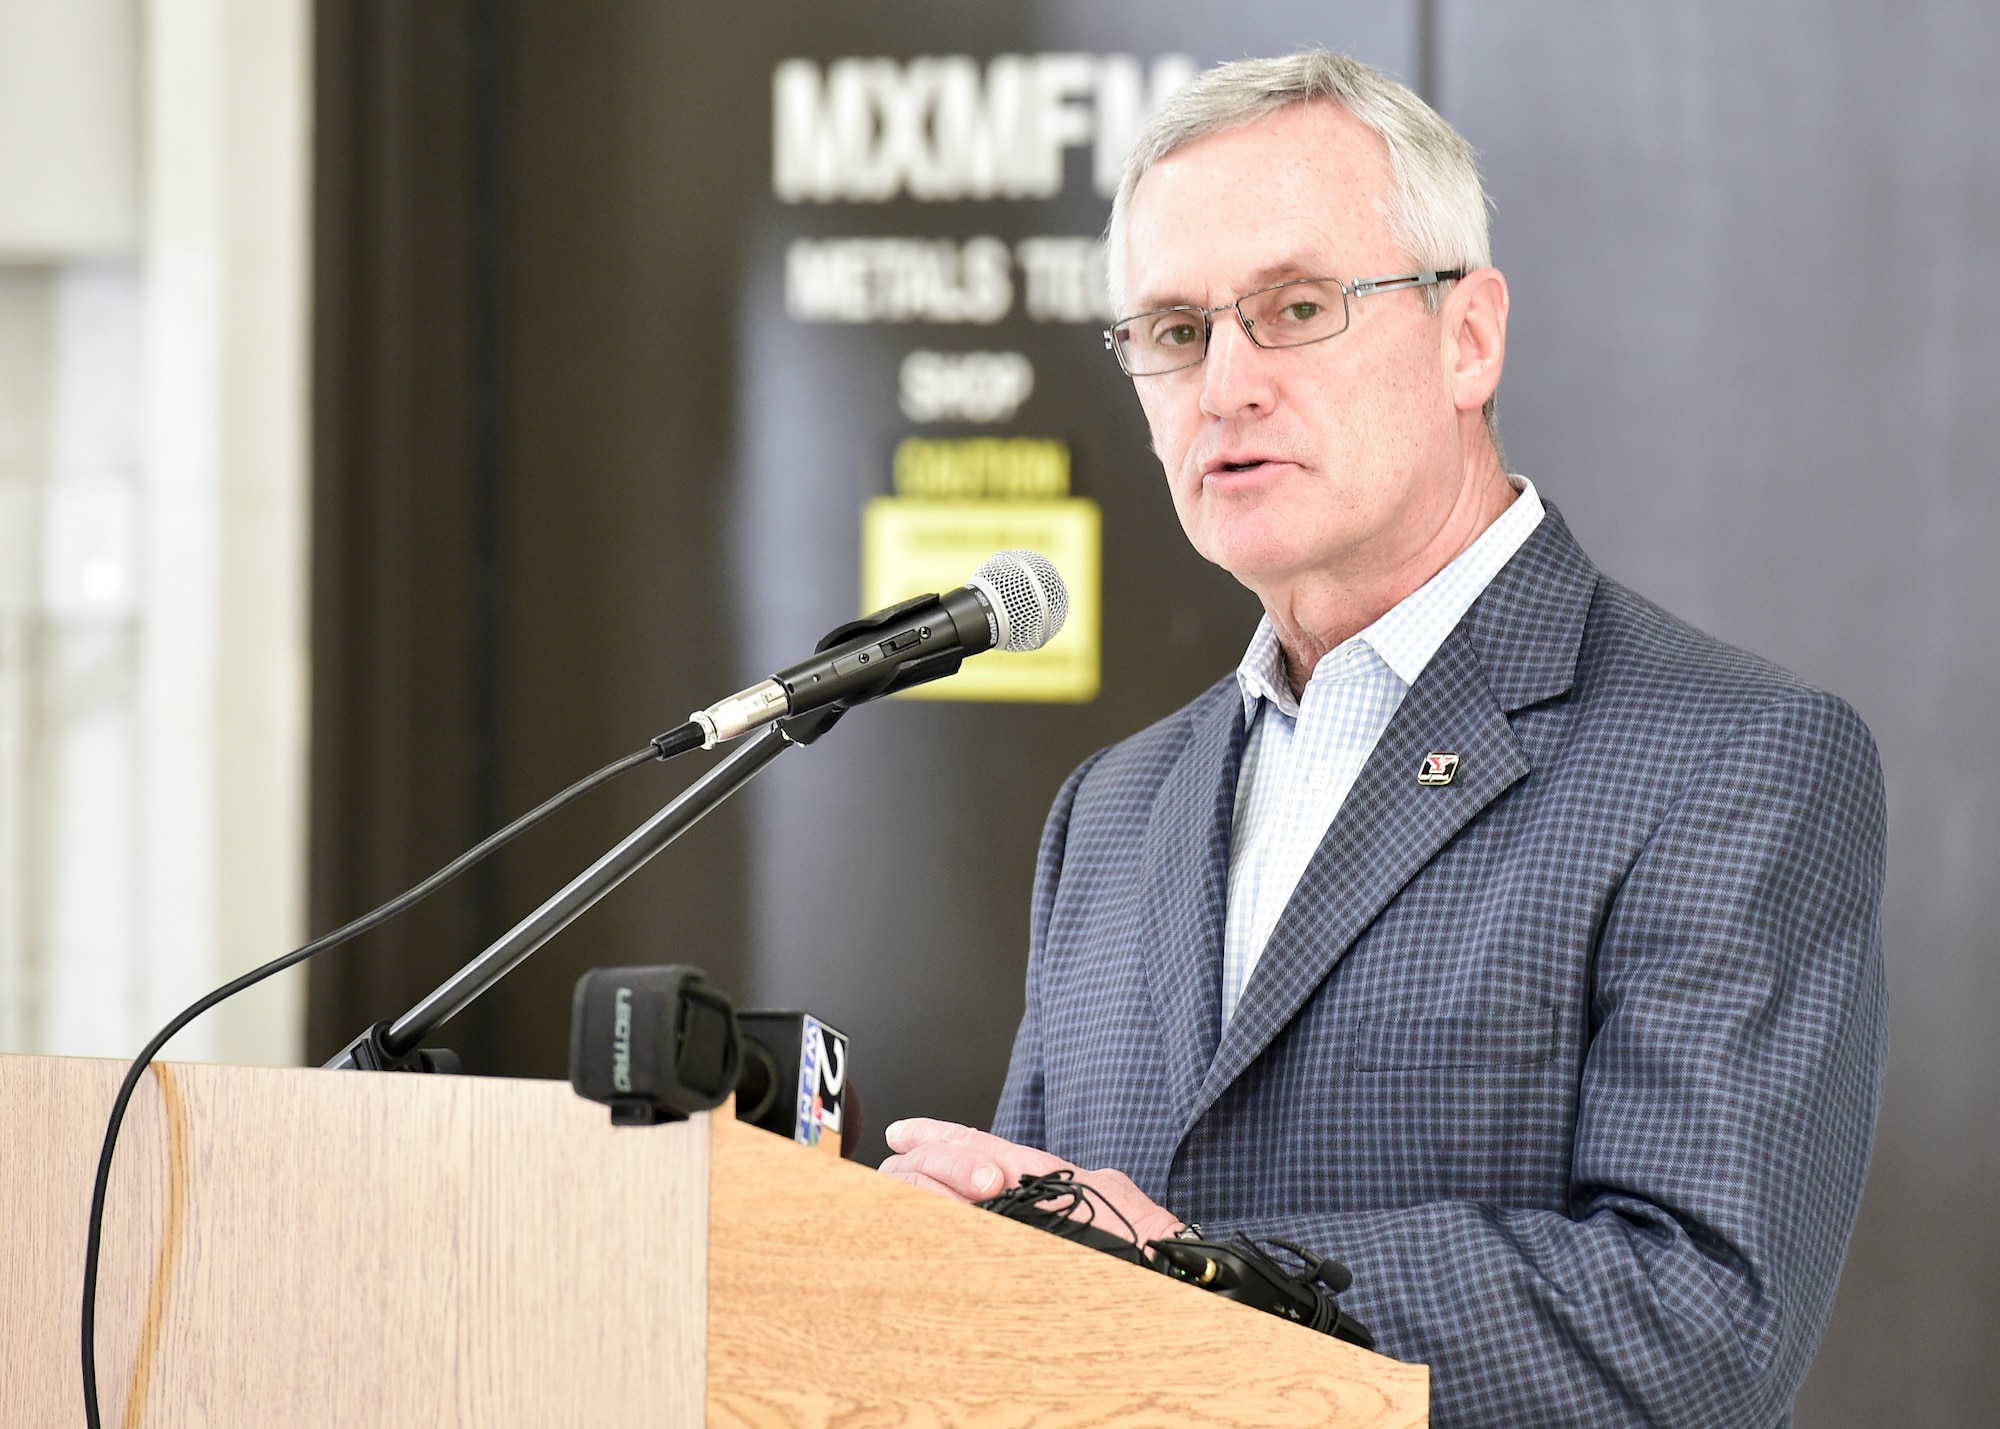 Youngstown State University President Jim Tressel gives remarks during a ceremony to unveil a new C-130H Hercules tail flash and nose art here, May 3, 2018.